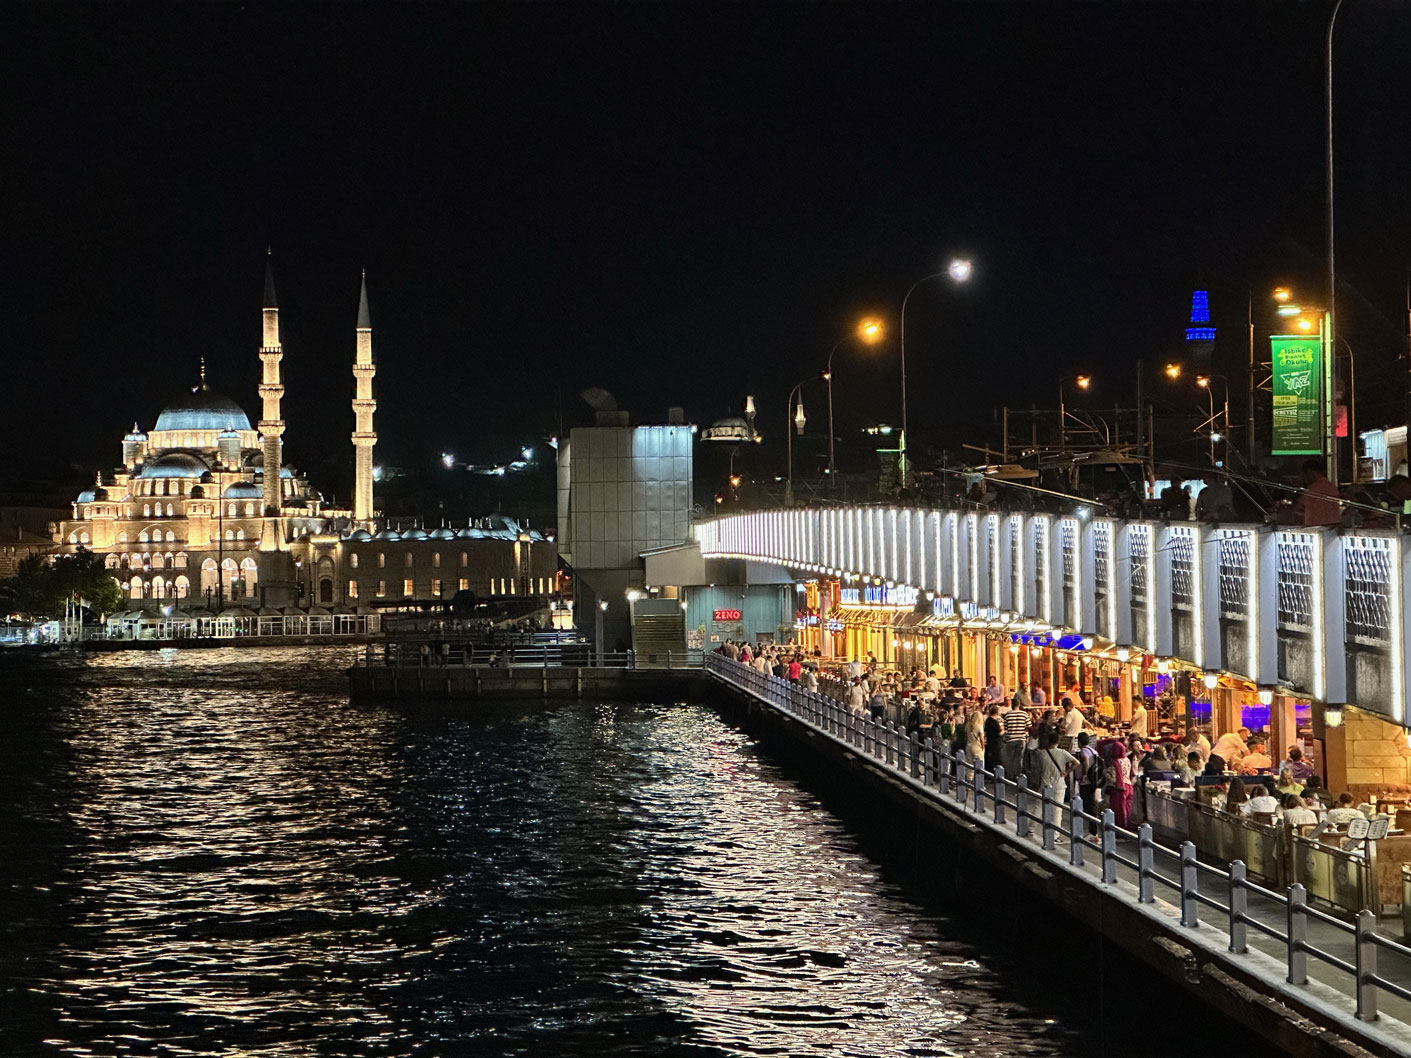 From the galata bridge view to Karakoy and Galata tower in the night